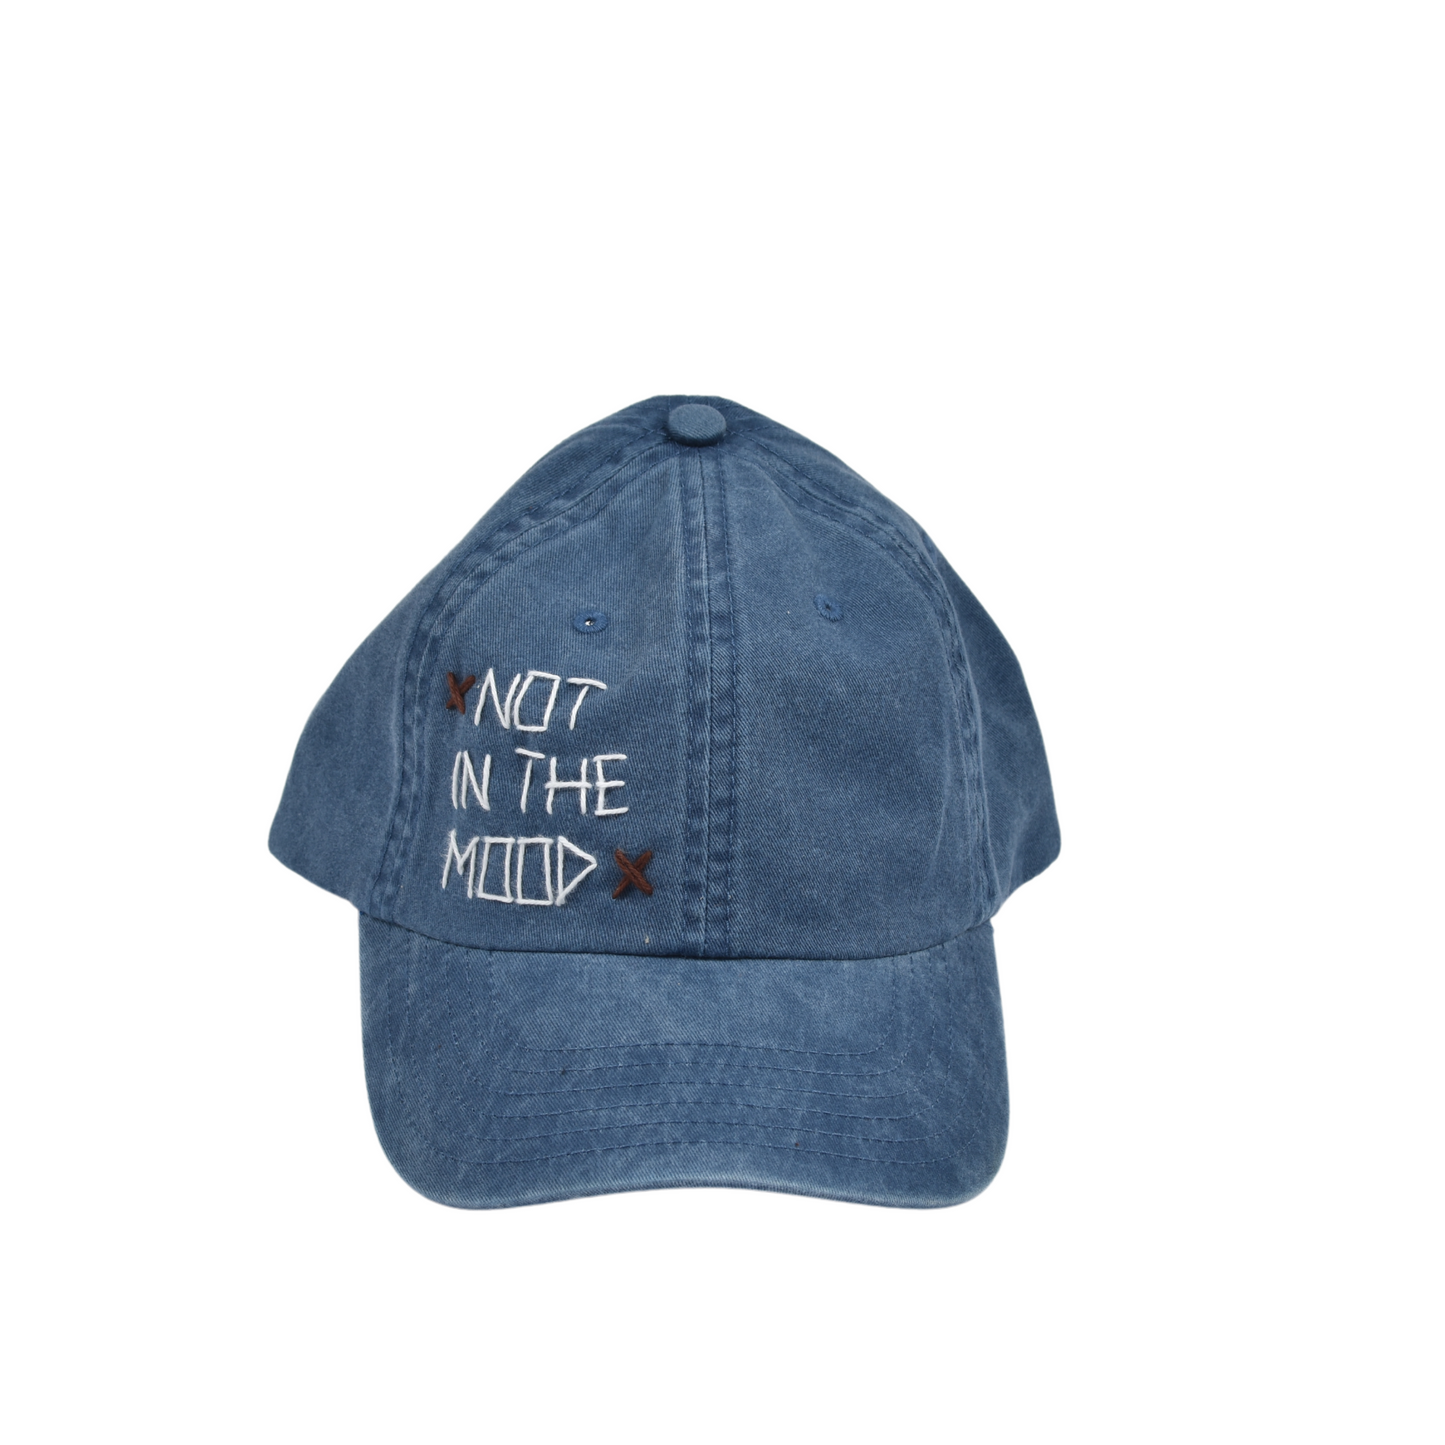 NOT IN THE MOOD - Baseball cotone